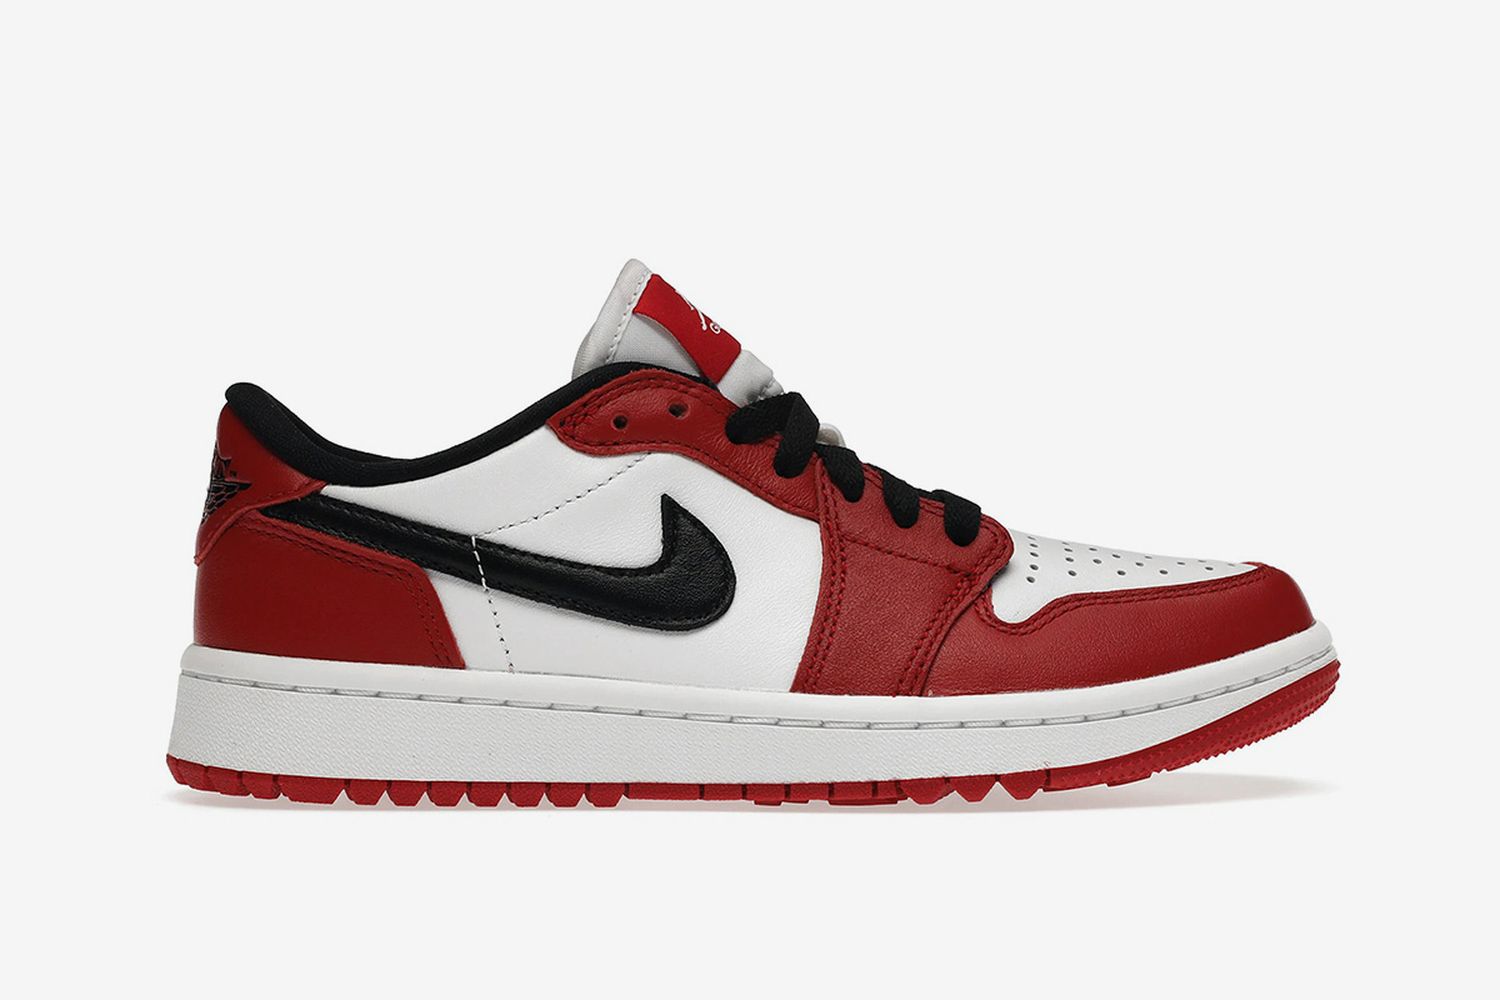 Nike Jordan 1 Chicago History: The Best Pairs Collabs